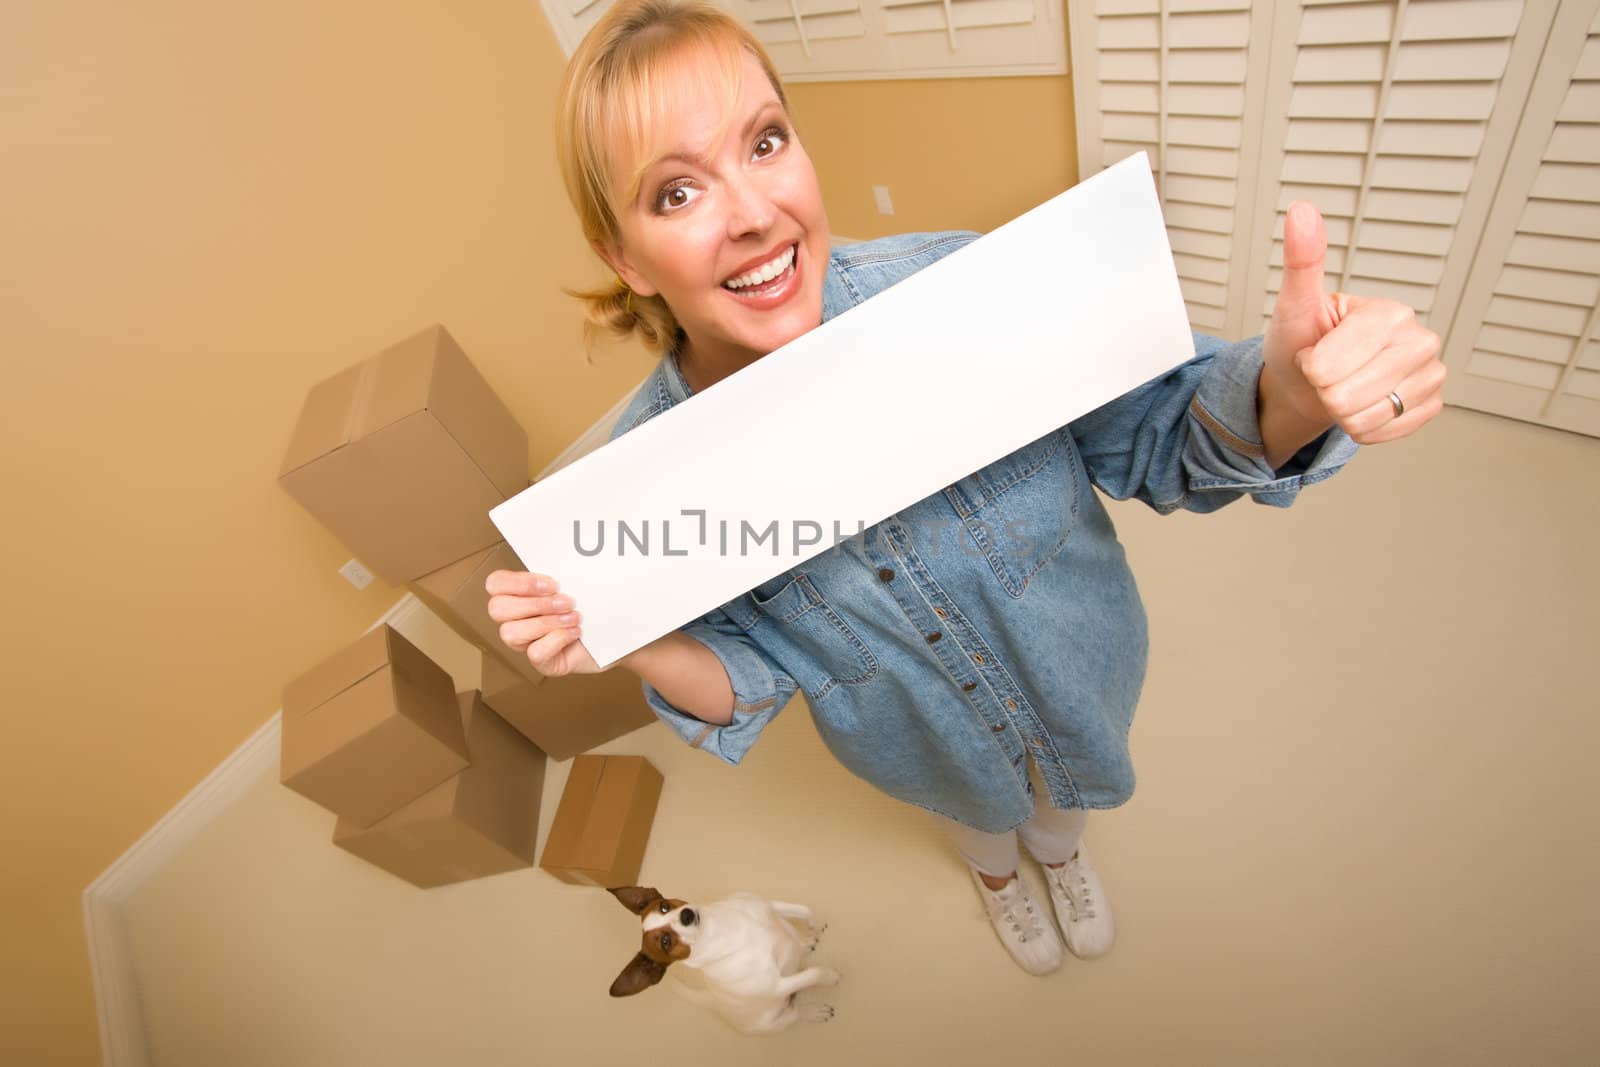 Excited Woman with Thumbs Up and Doggy Holding Blank Sign Near Moving Boxes in Empty Room Taken with Extreme Wide Angle Lens.
